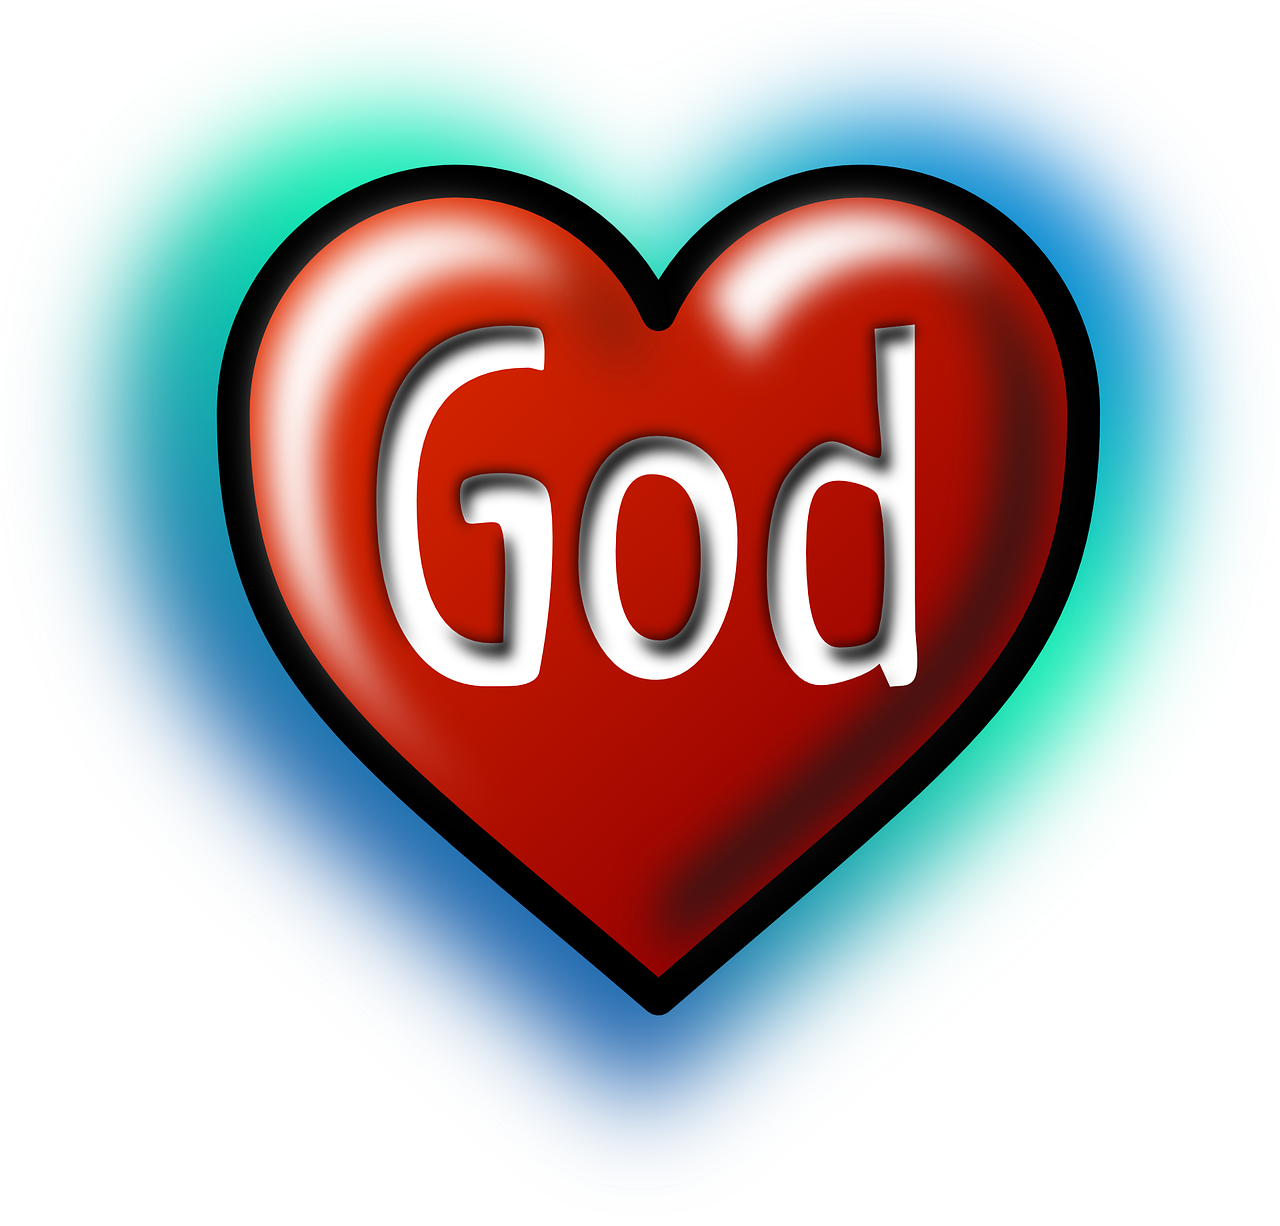 Free God's Power Cliparts, Download Free Clip Art, Free Clip Art on